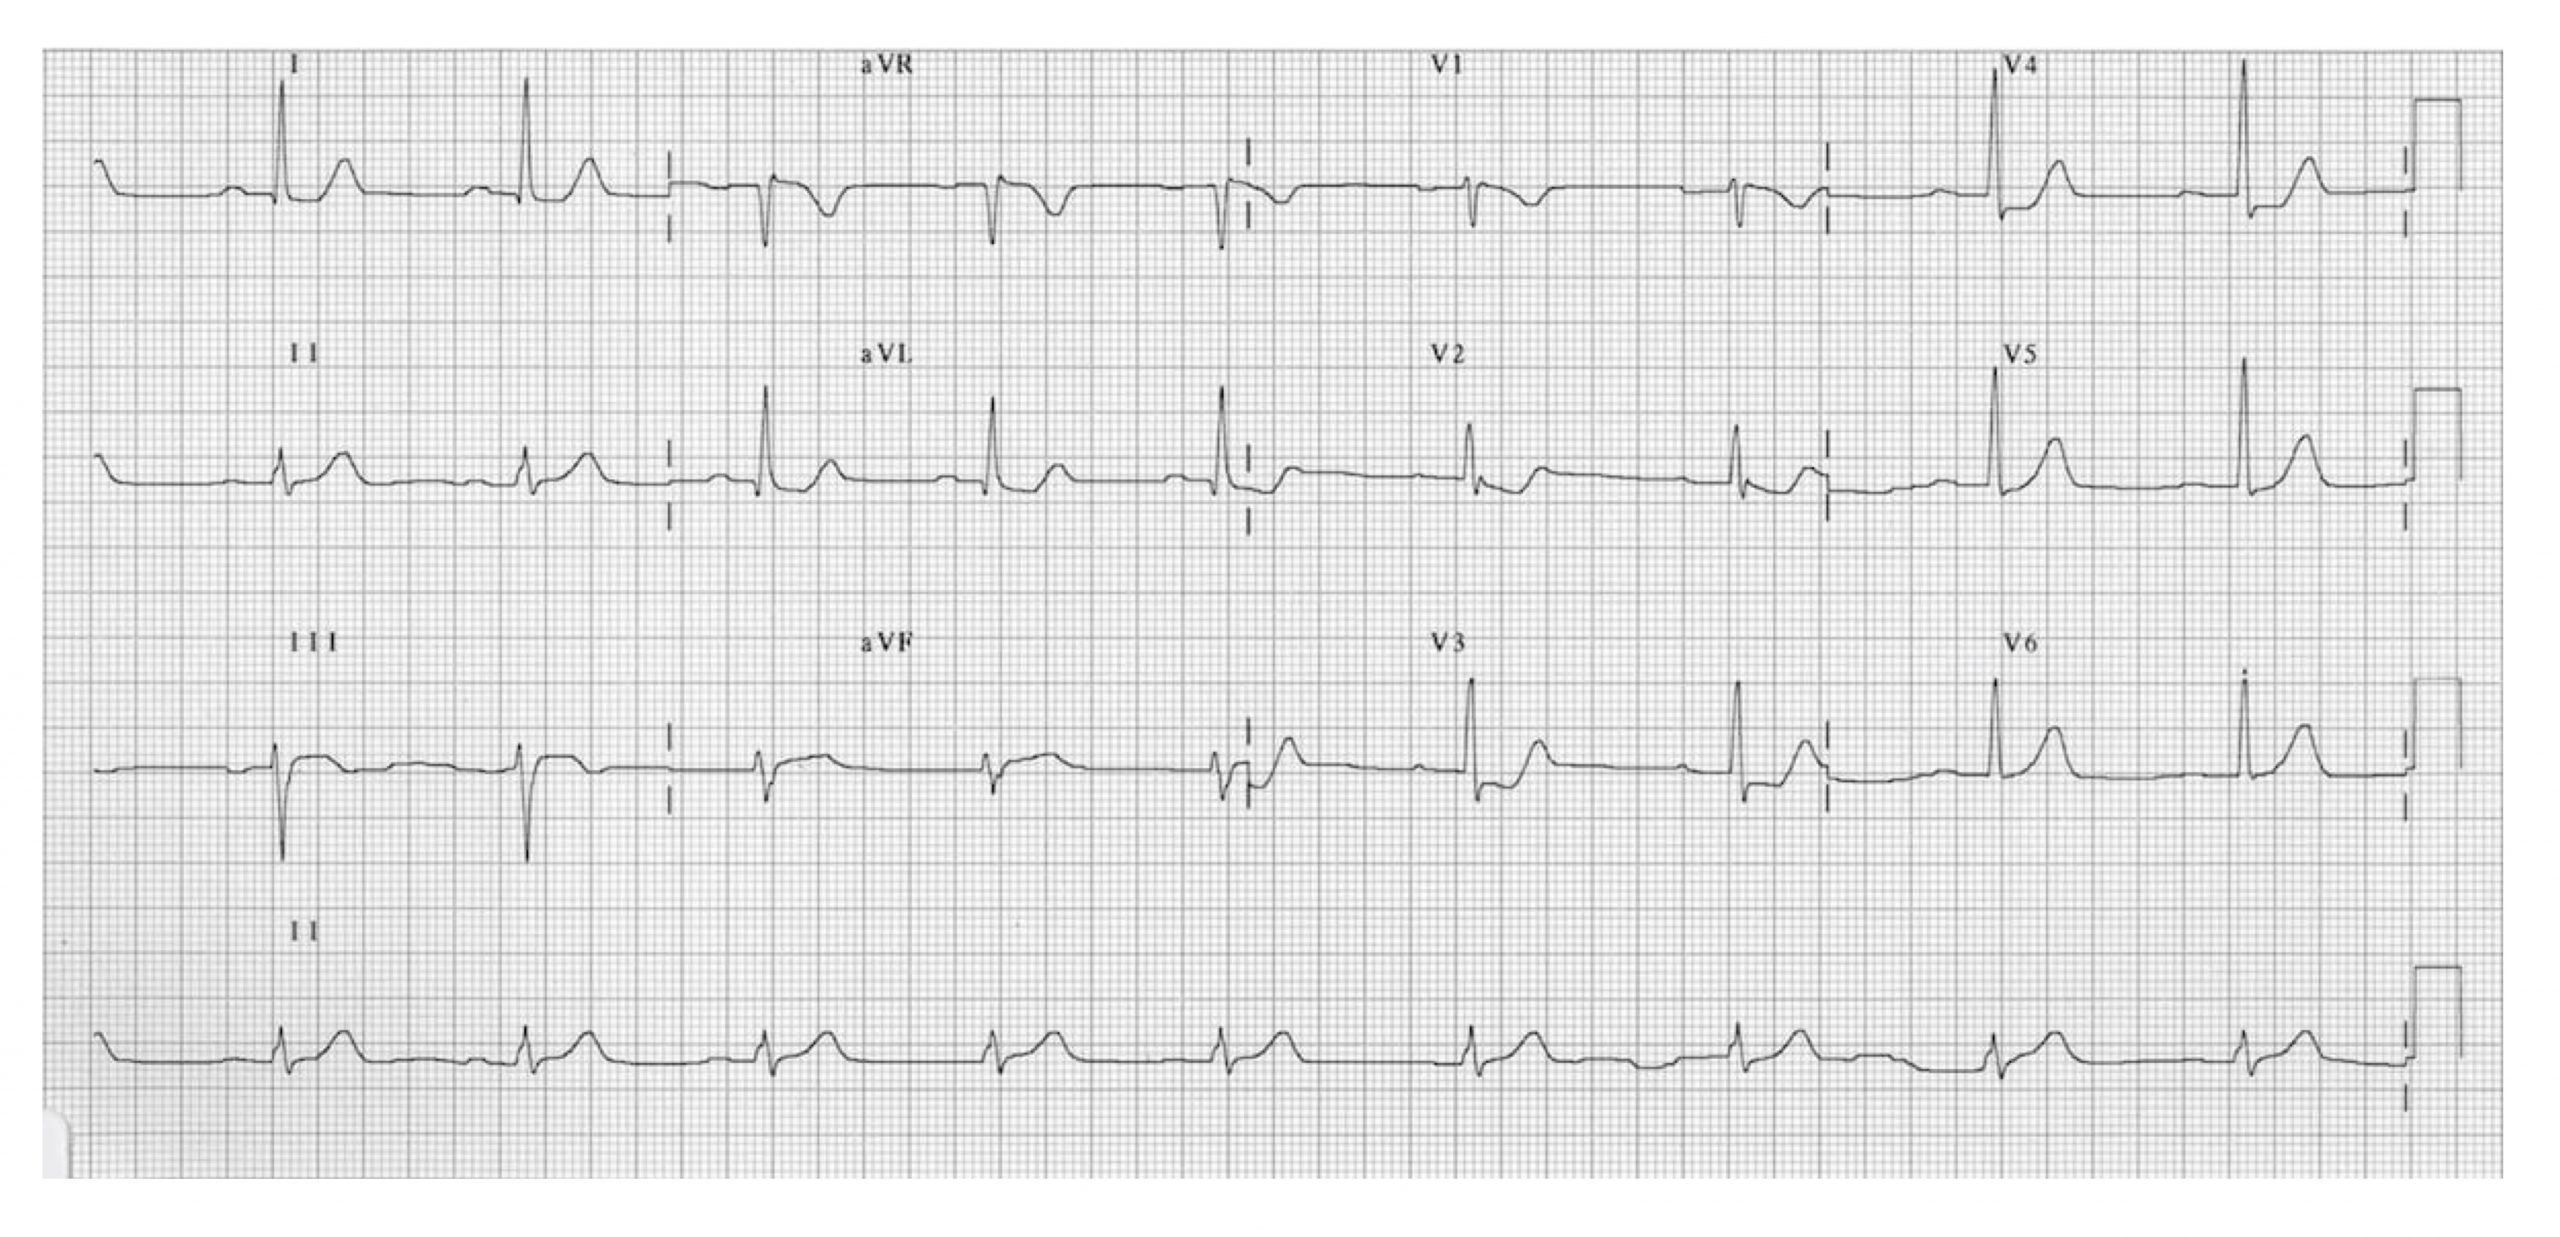 All leads of a 12-lead ECG are shown to illustrate the consequences of an posterior wall MI. There is S-T depression in V1-V4. Posterior Leads V7-V9 are not shown, but would confirm a posterior wall infarction if they included S-T elevation.